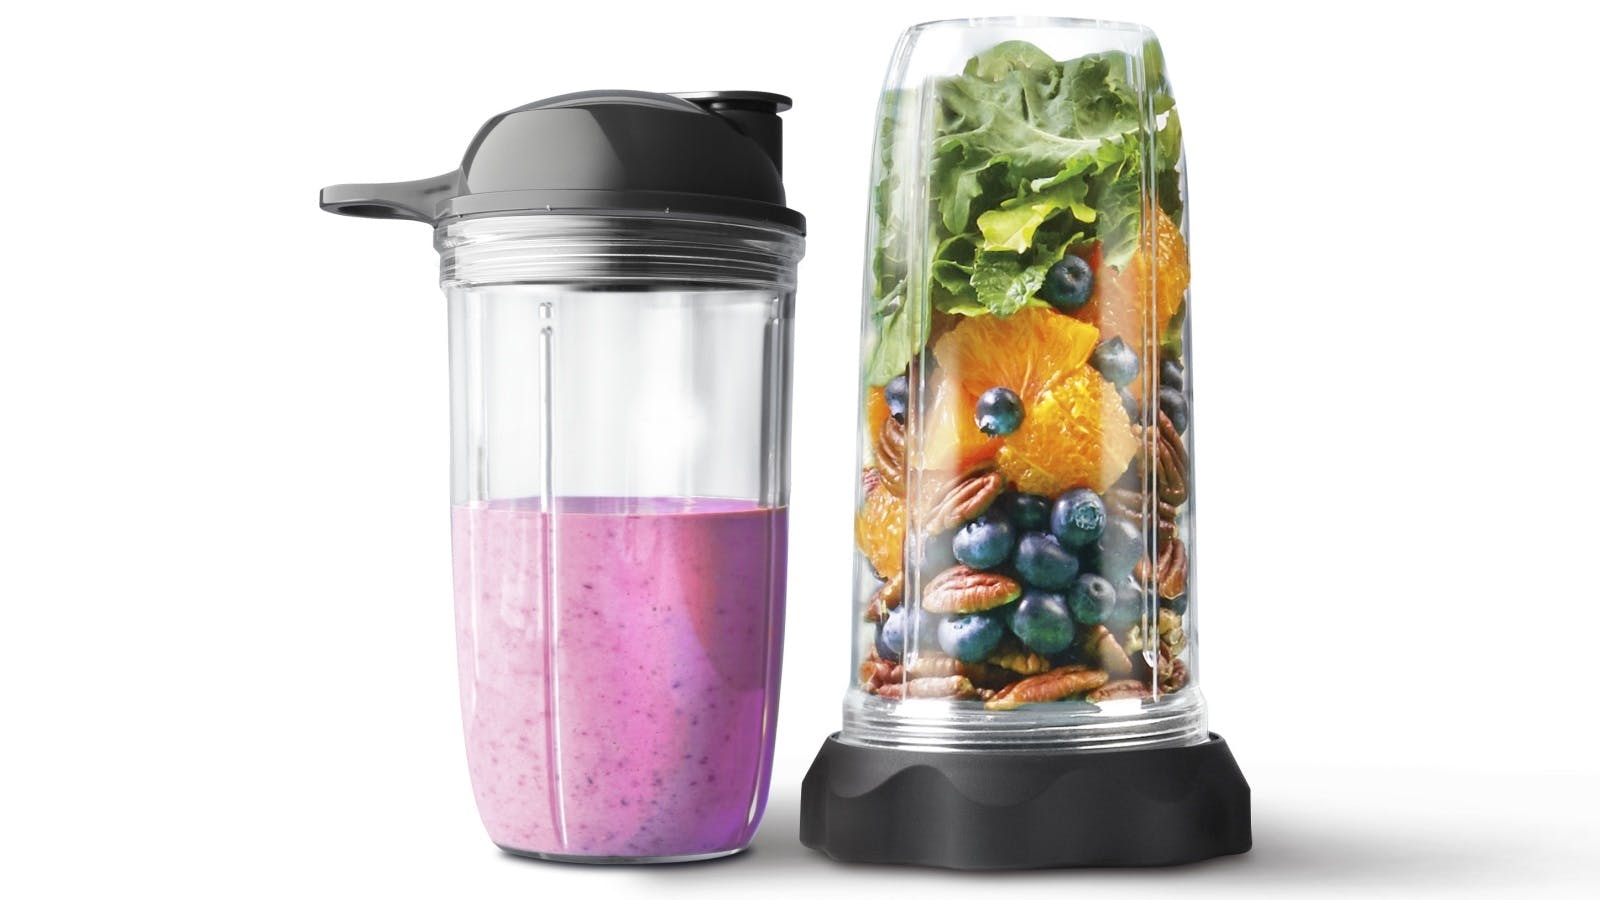 https://hnau.imgix.net/media/catalog/product/b/d/bdm-0407cdb-nutribullet-deluxe-upgrade-kit-ii-2_4.jpg?auto=compress&auto=format&fill-color=FFFFFF&fit=fill&fill=solid&w=undefined&h=undefined